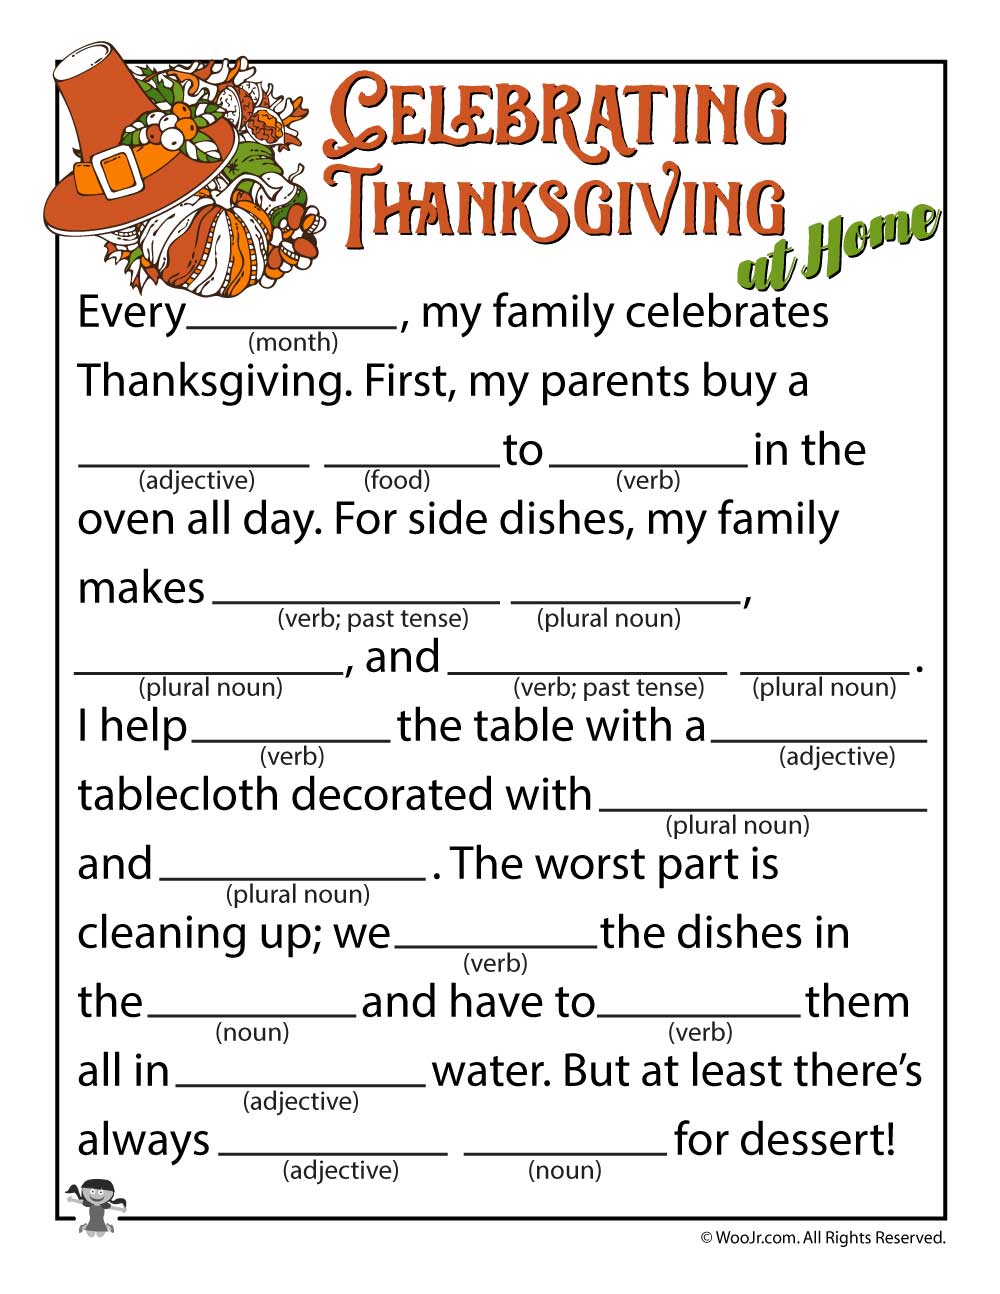 12-funny-thanksgiving-mad-libs-for-all-kitty-baby-love